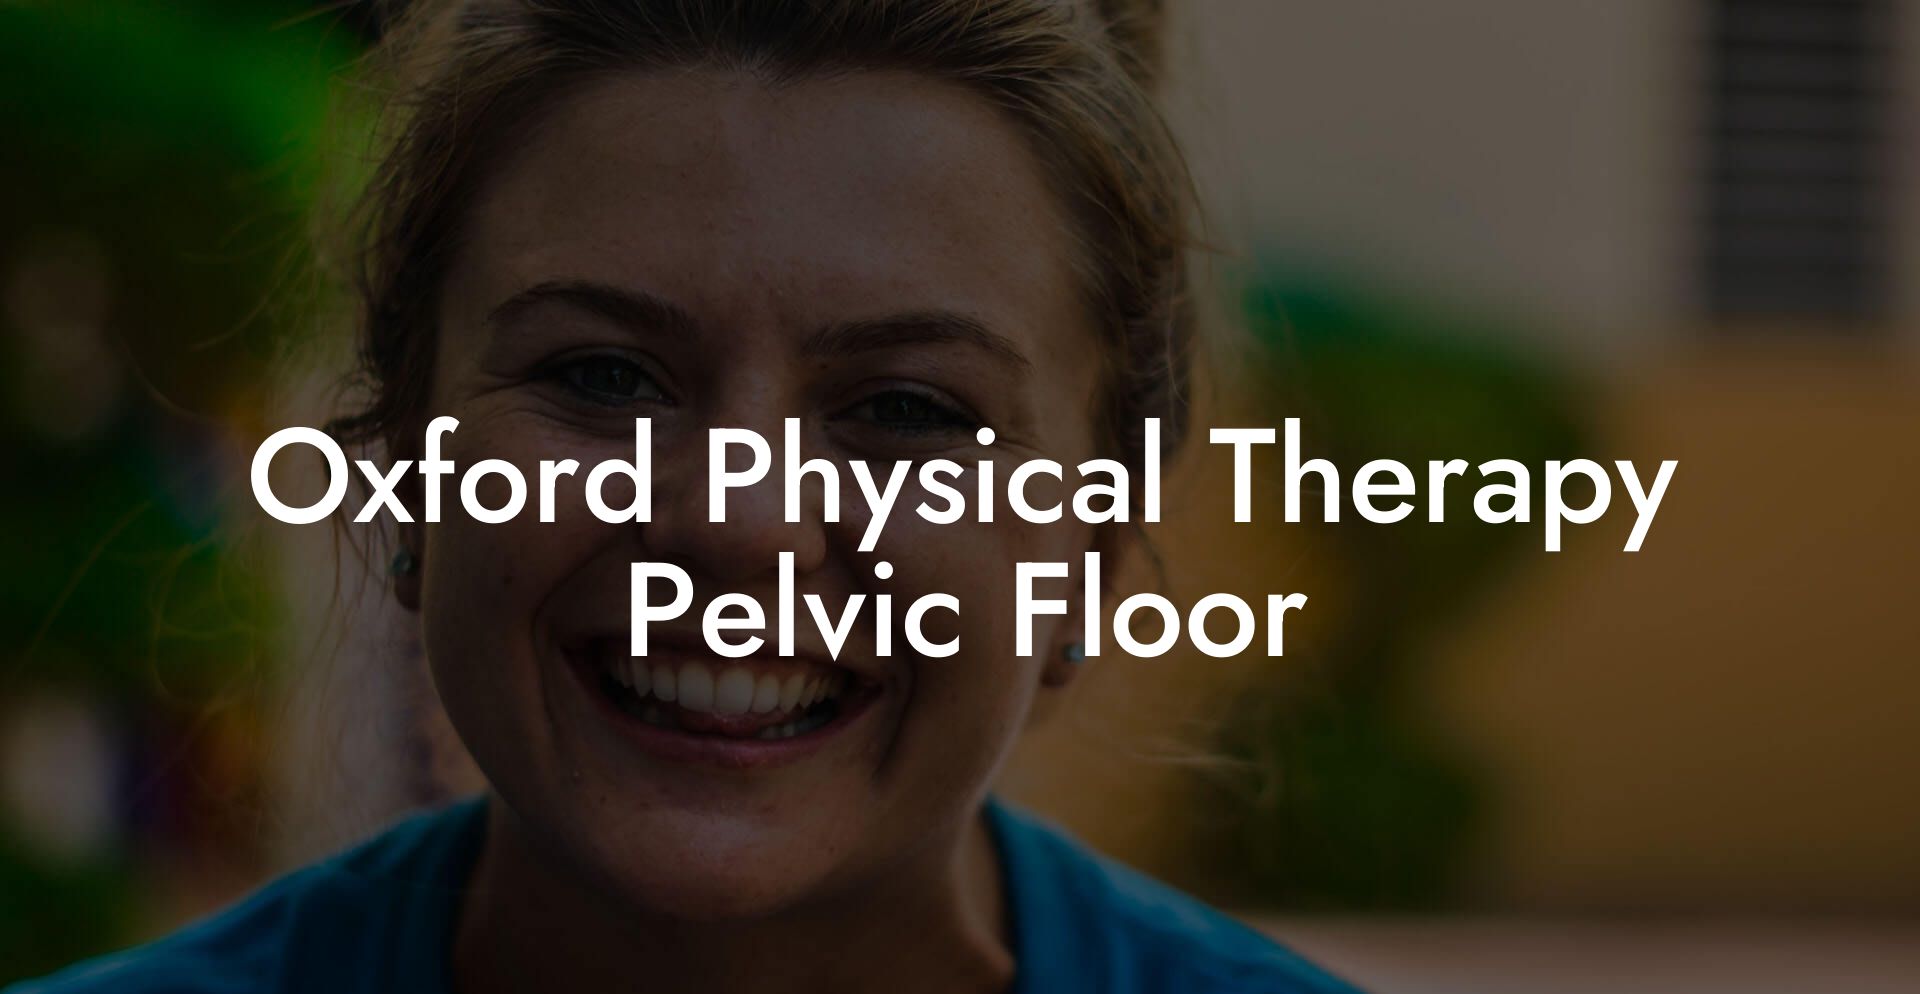 Oxford Physical Therapy Pelvic Floor